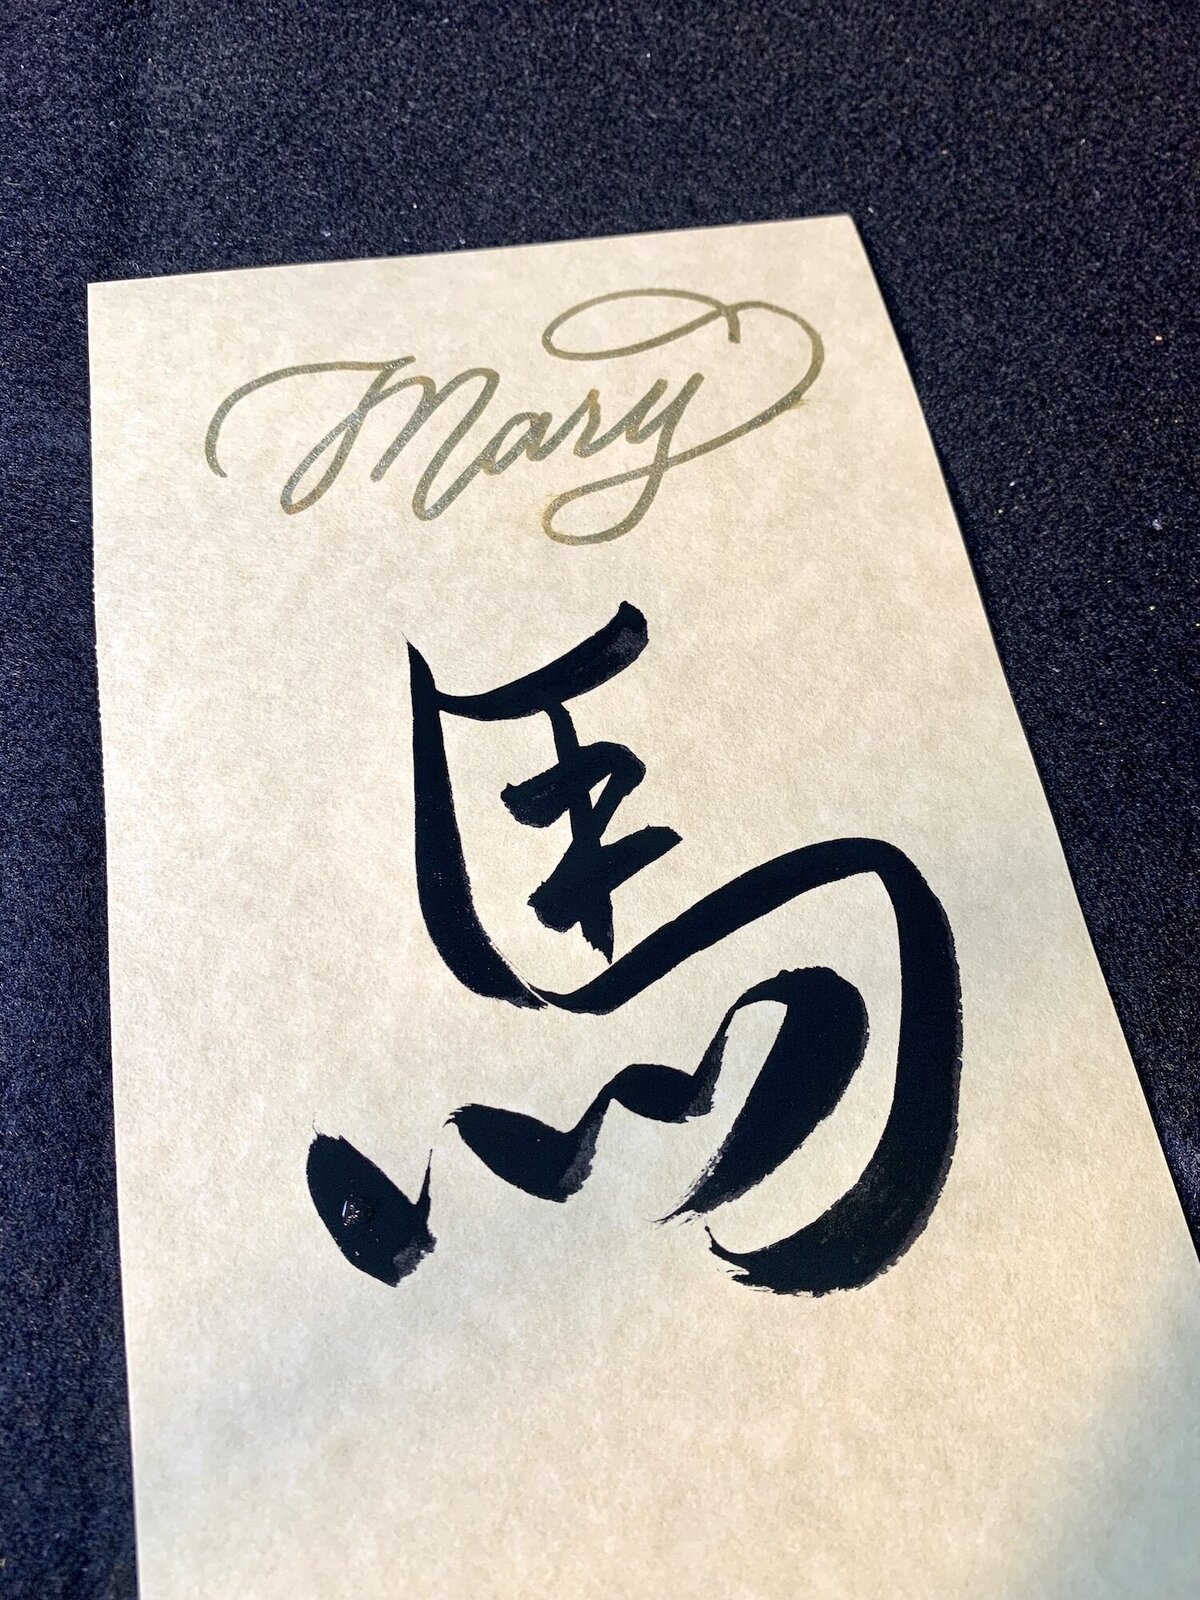 Calligraphy By Rancy Los Angeles onsite Chinese Calligrapher